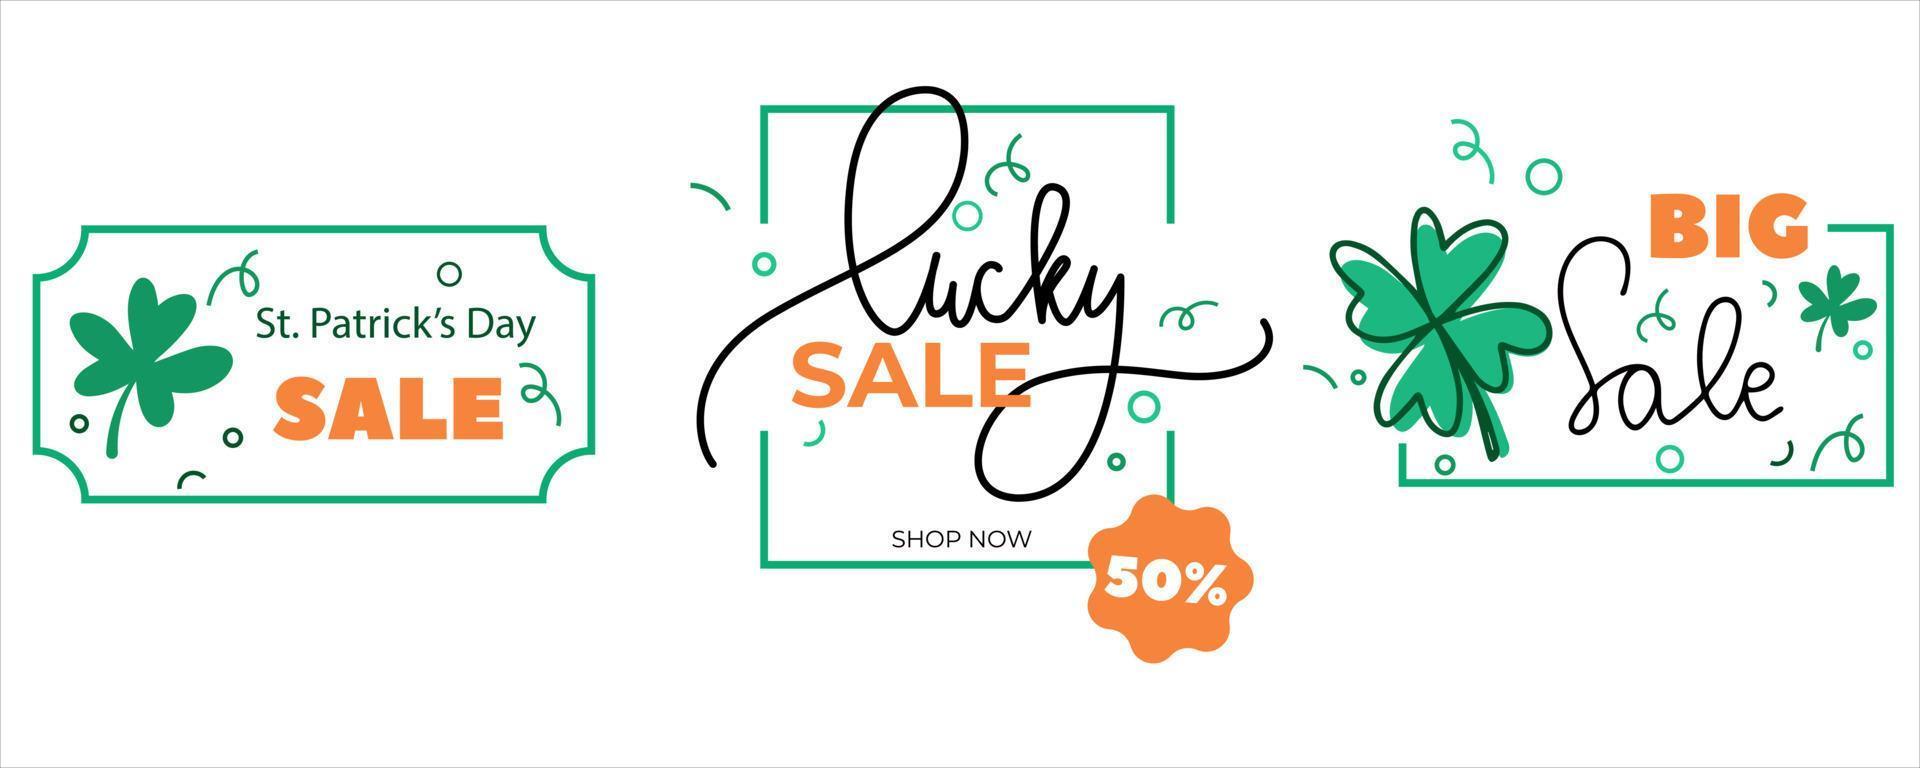 St. Patrick's Day Sale template design vector